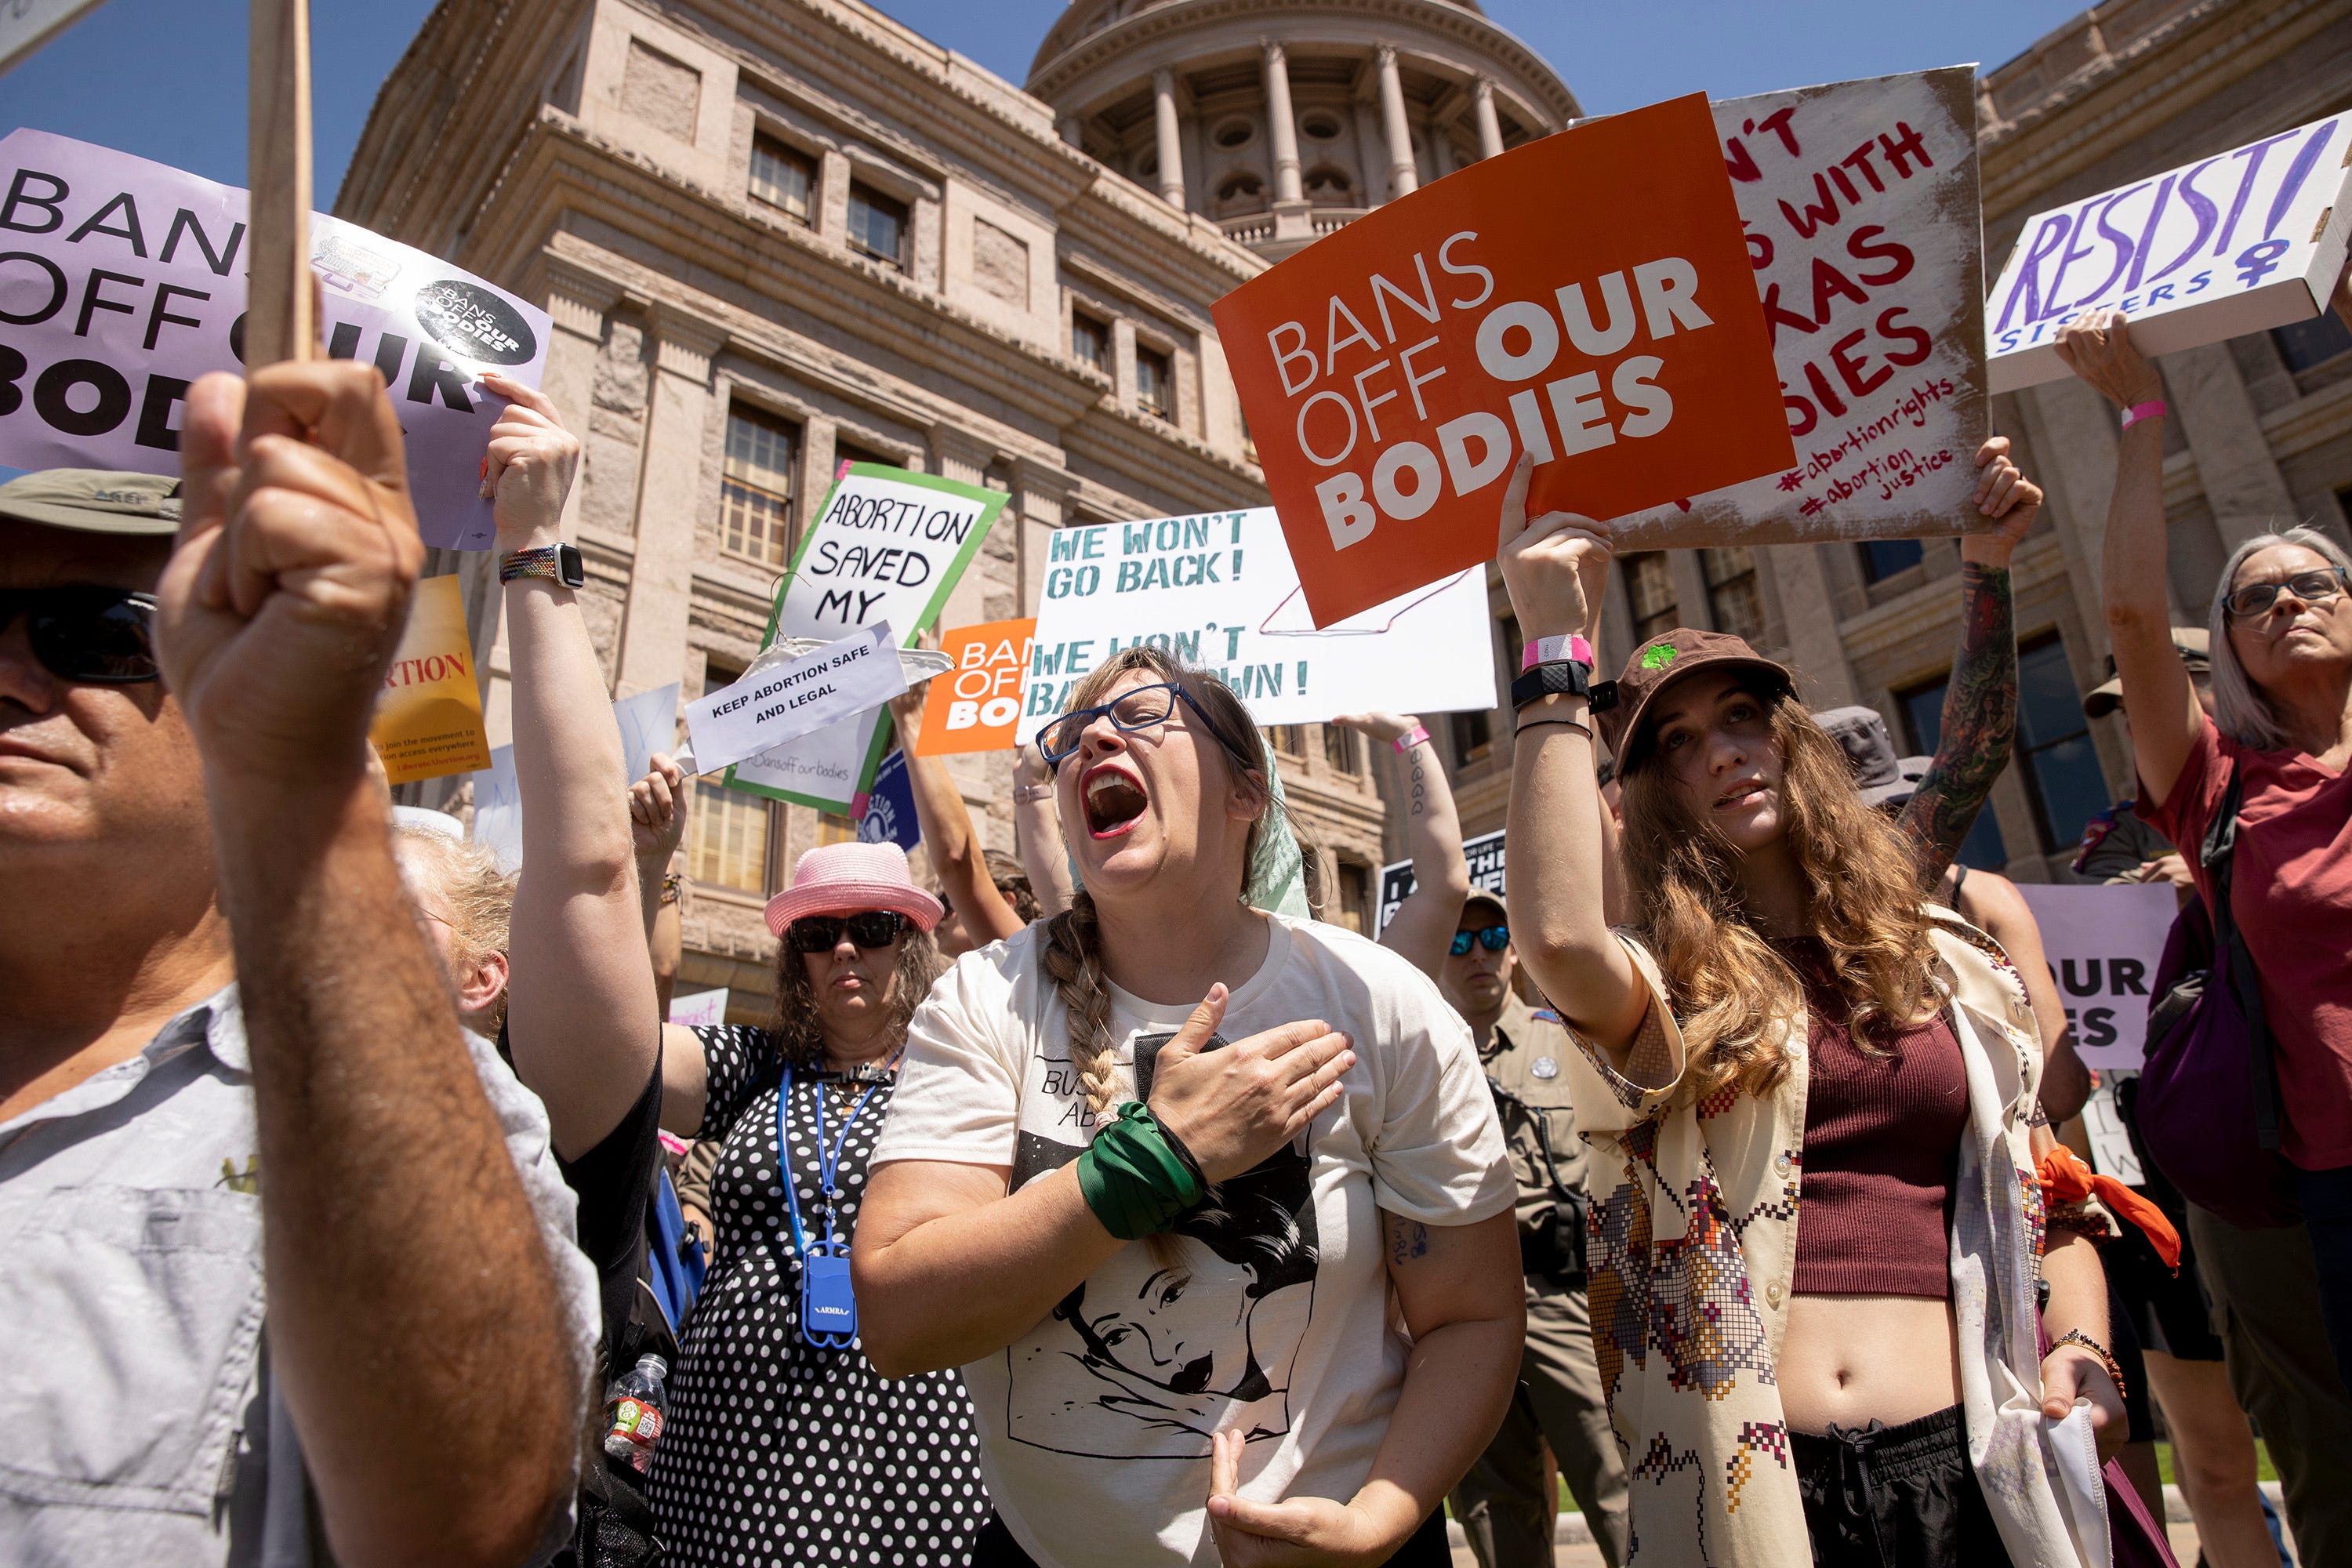 May 14 2022: People rally for abortion rights at the Capitol in Austin, Texas. Thousands of people form around Texas attended the Bans Off Our Bodies rally.